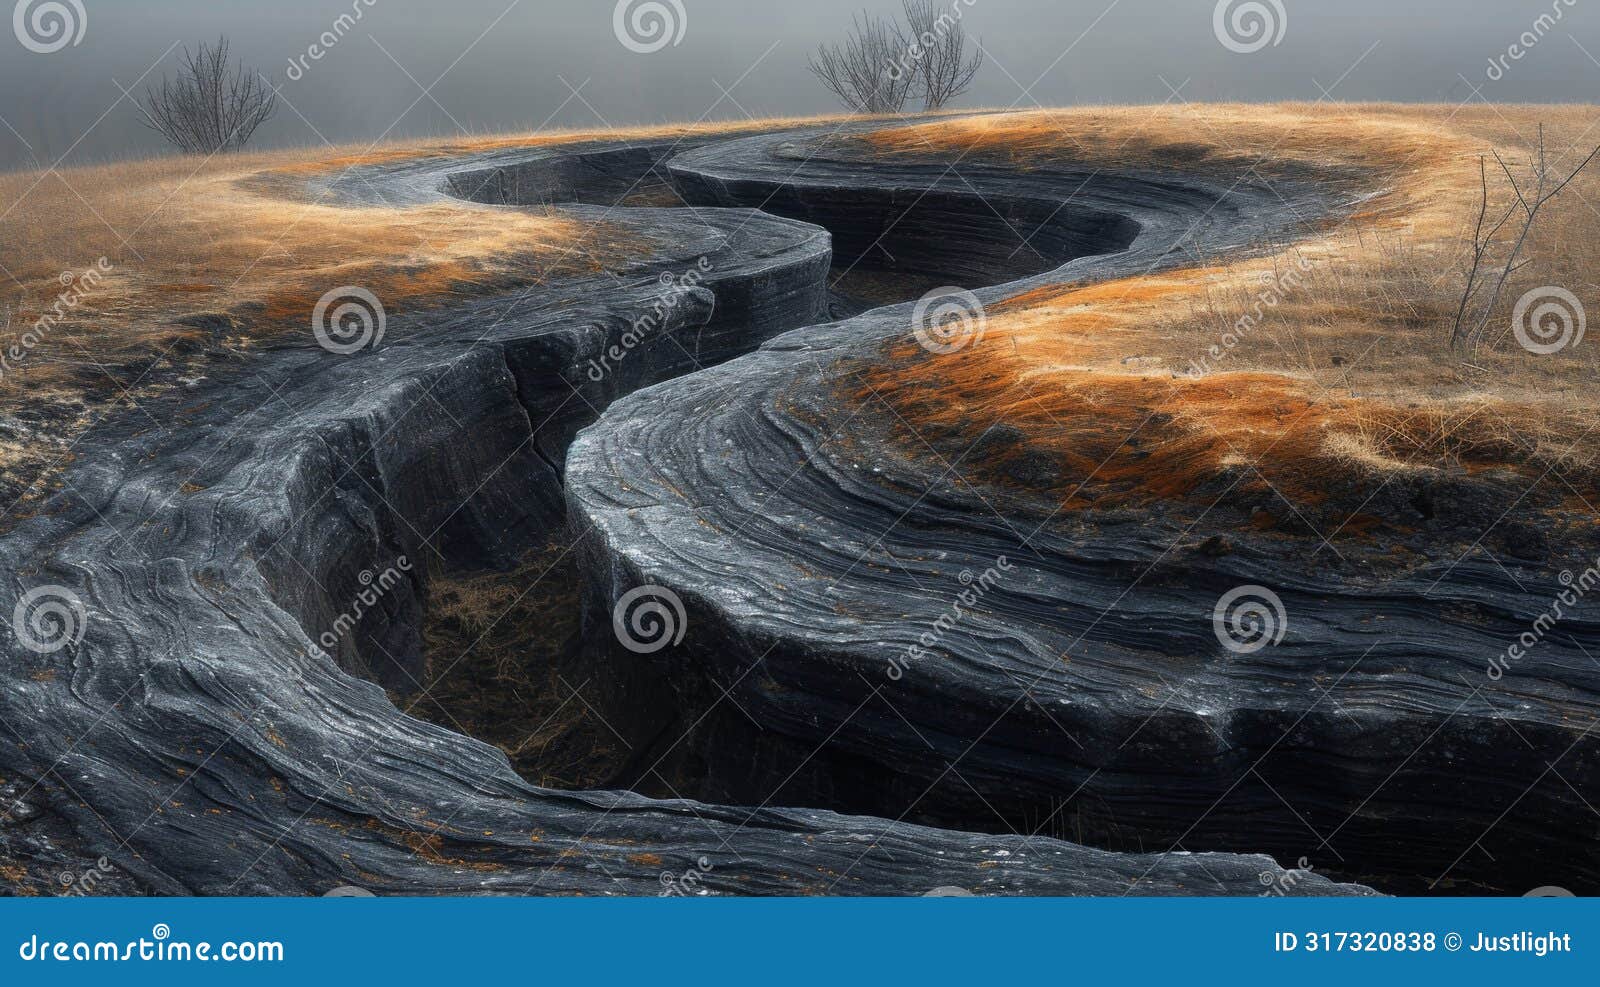 texture of delicate ridges and swirls in the landscape evidence of gradual erosion over time